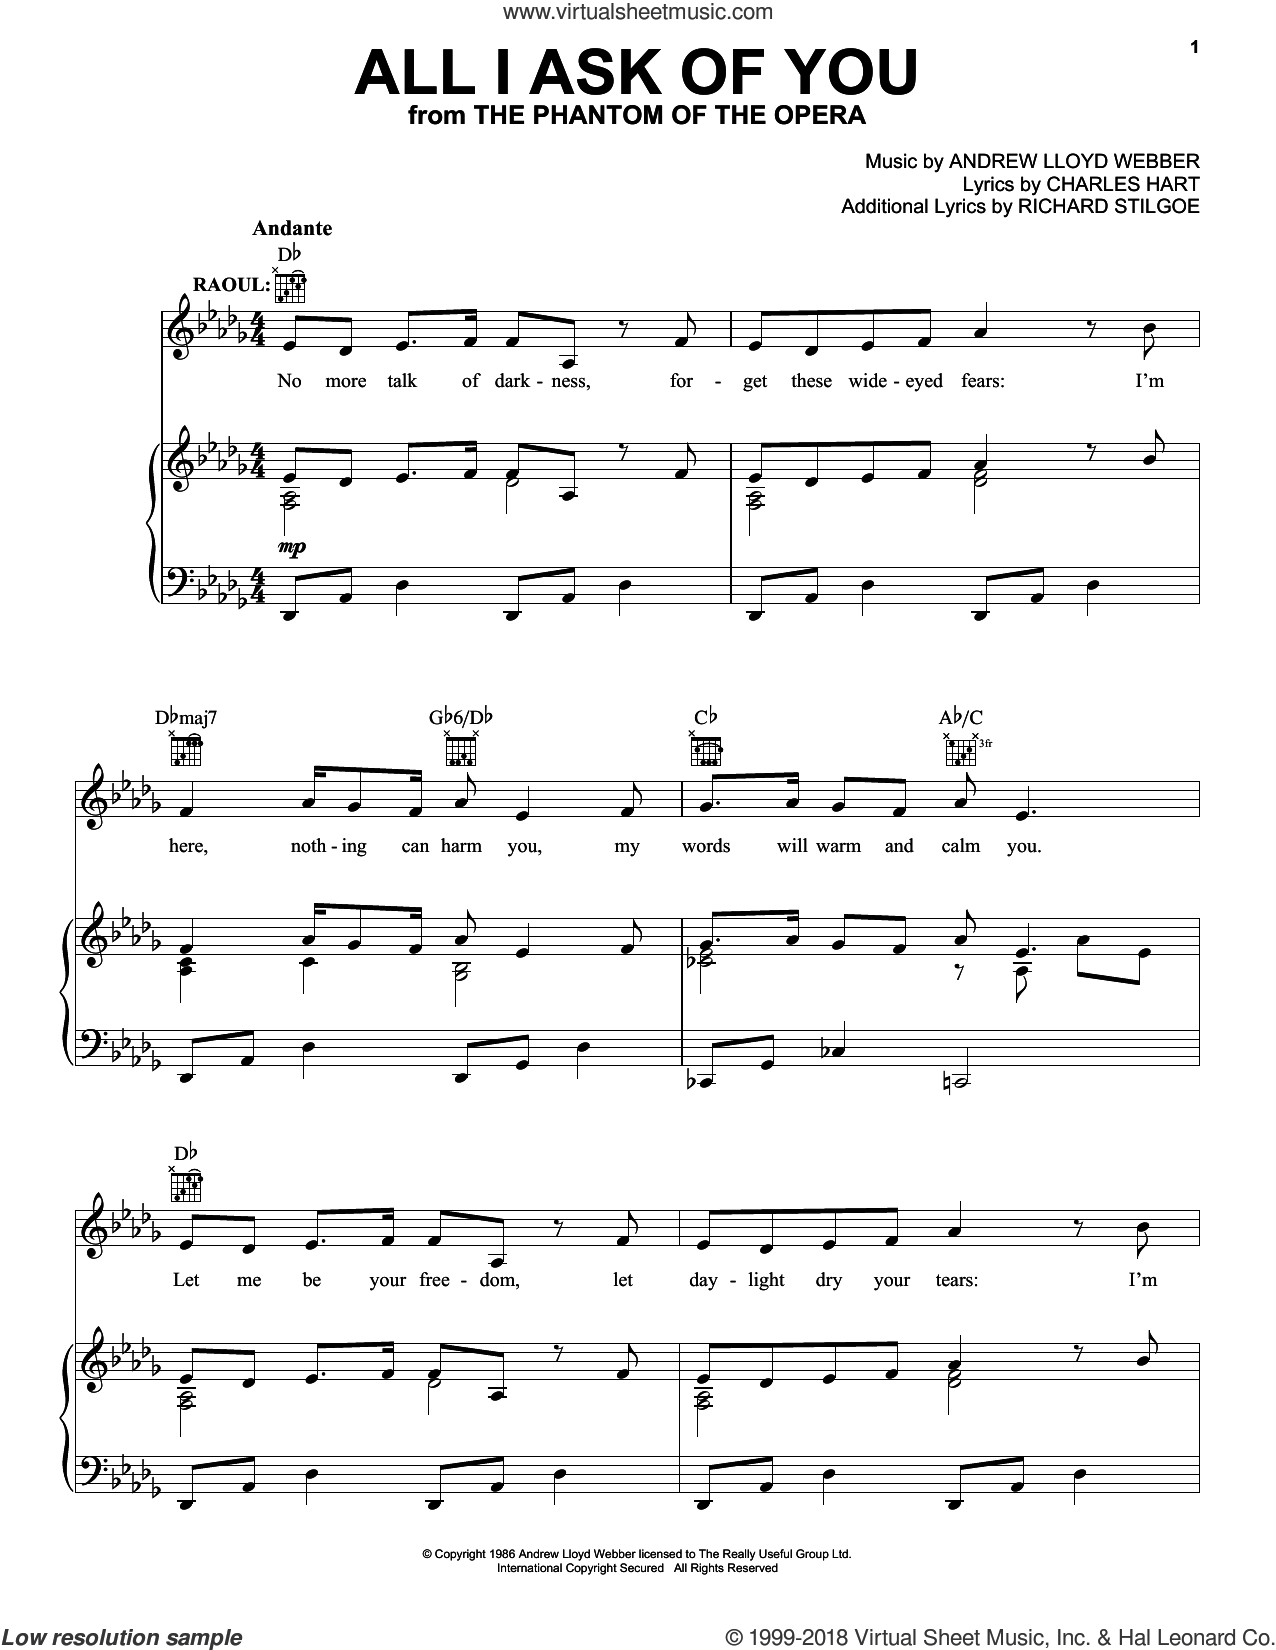 All I Ask Chords Webber All I Ask Of You From The Phantom Of The Opera Sheet Music For Voice Piano Or Guitar